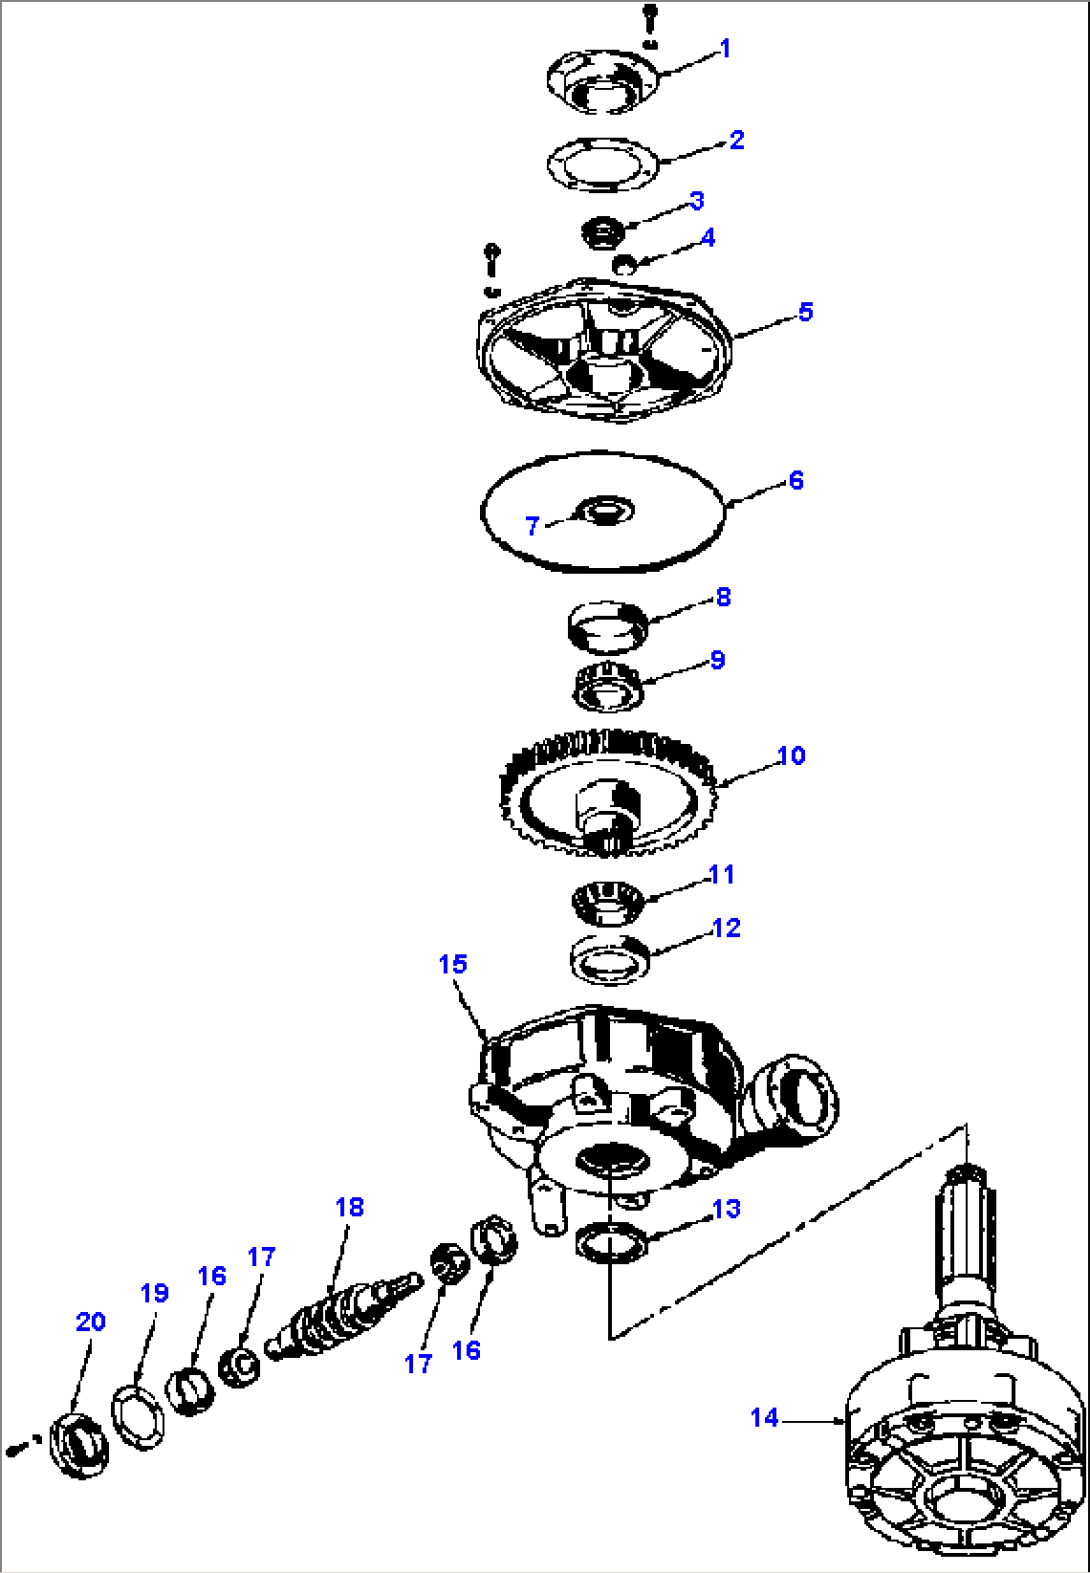 CIRCLE REVERSE GEAR CASE WITH SLIP CLUTCH